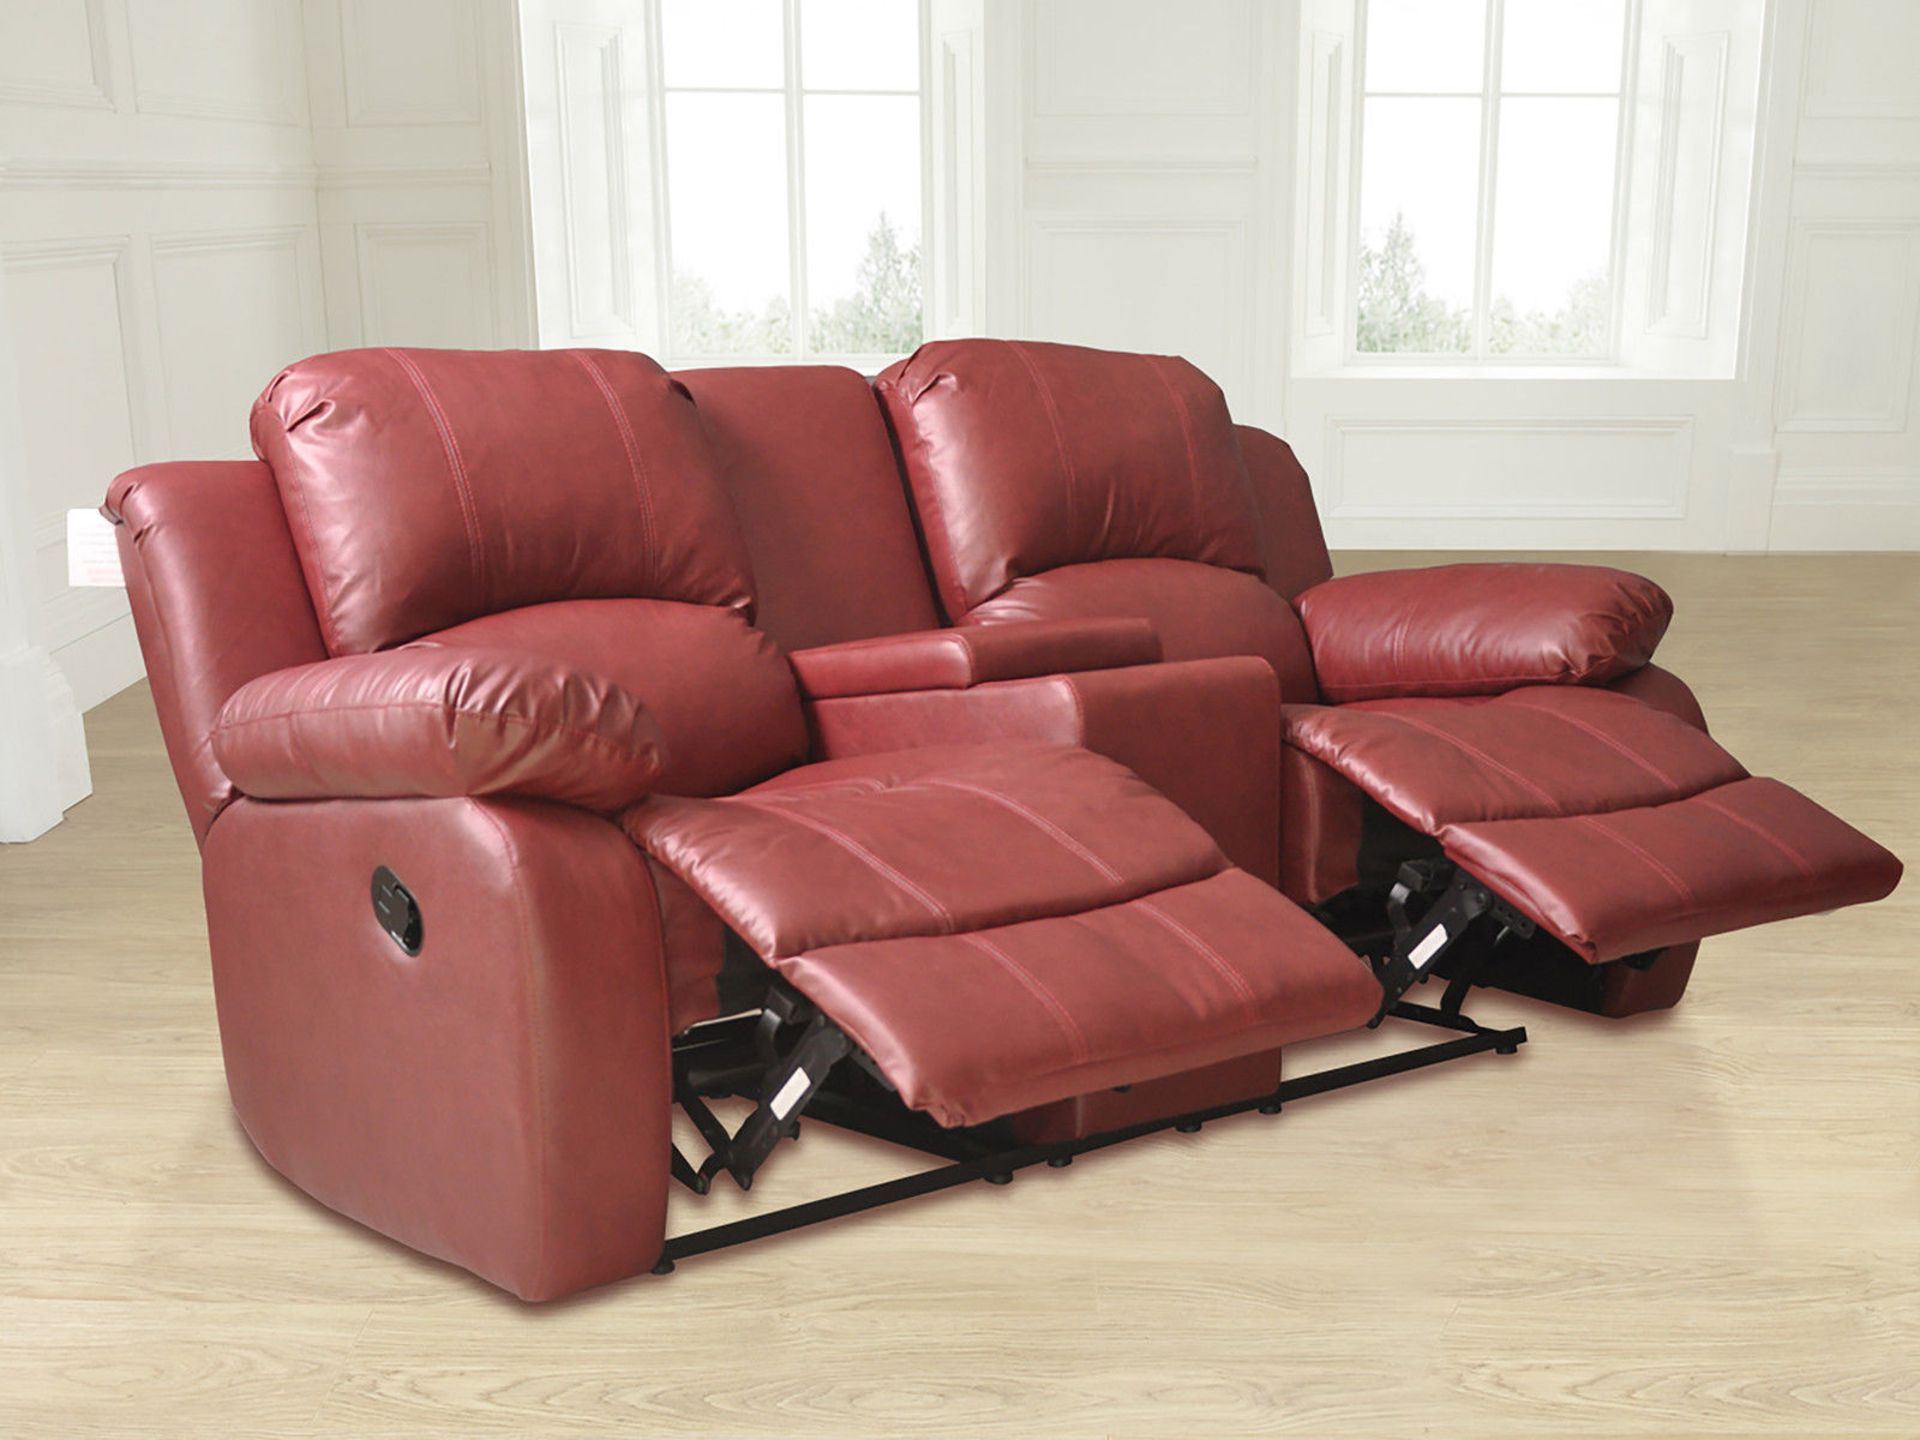 Supreme Valance burgandy leather 3 seater reclining sofa with console and matching 2 seater